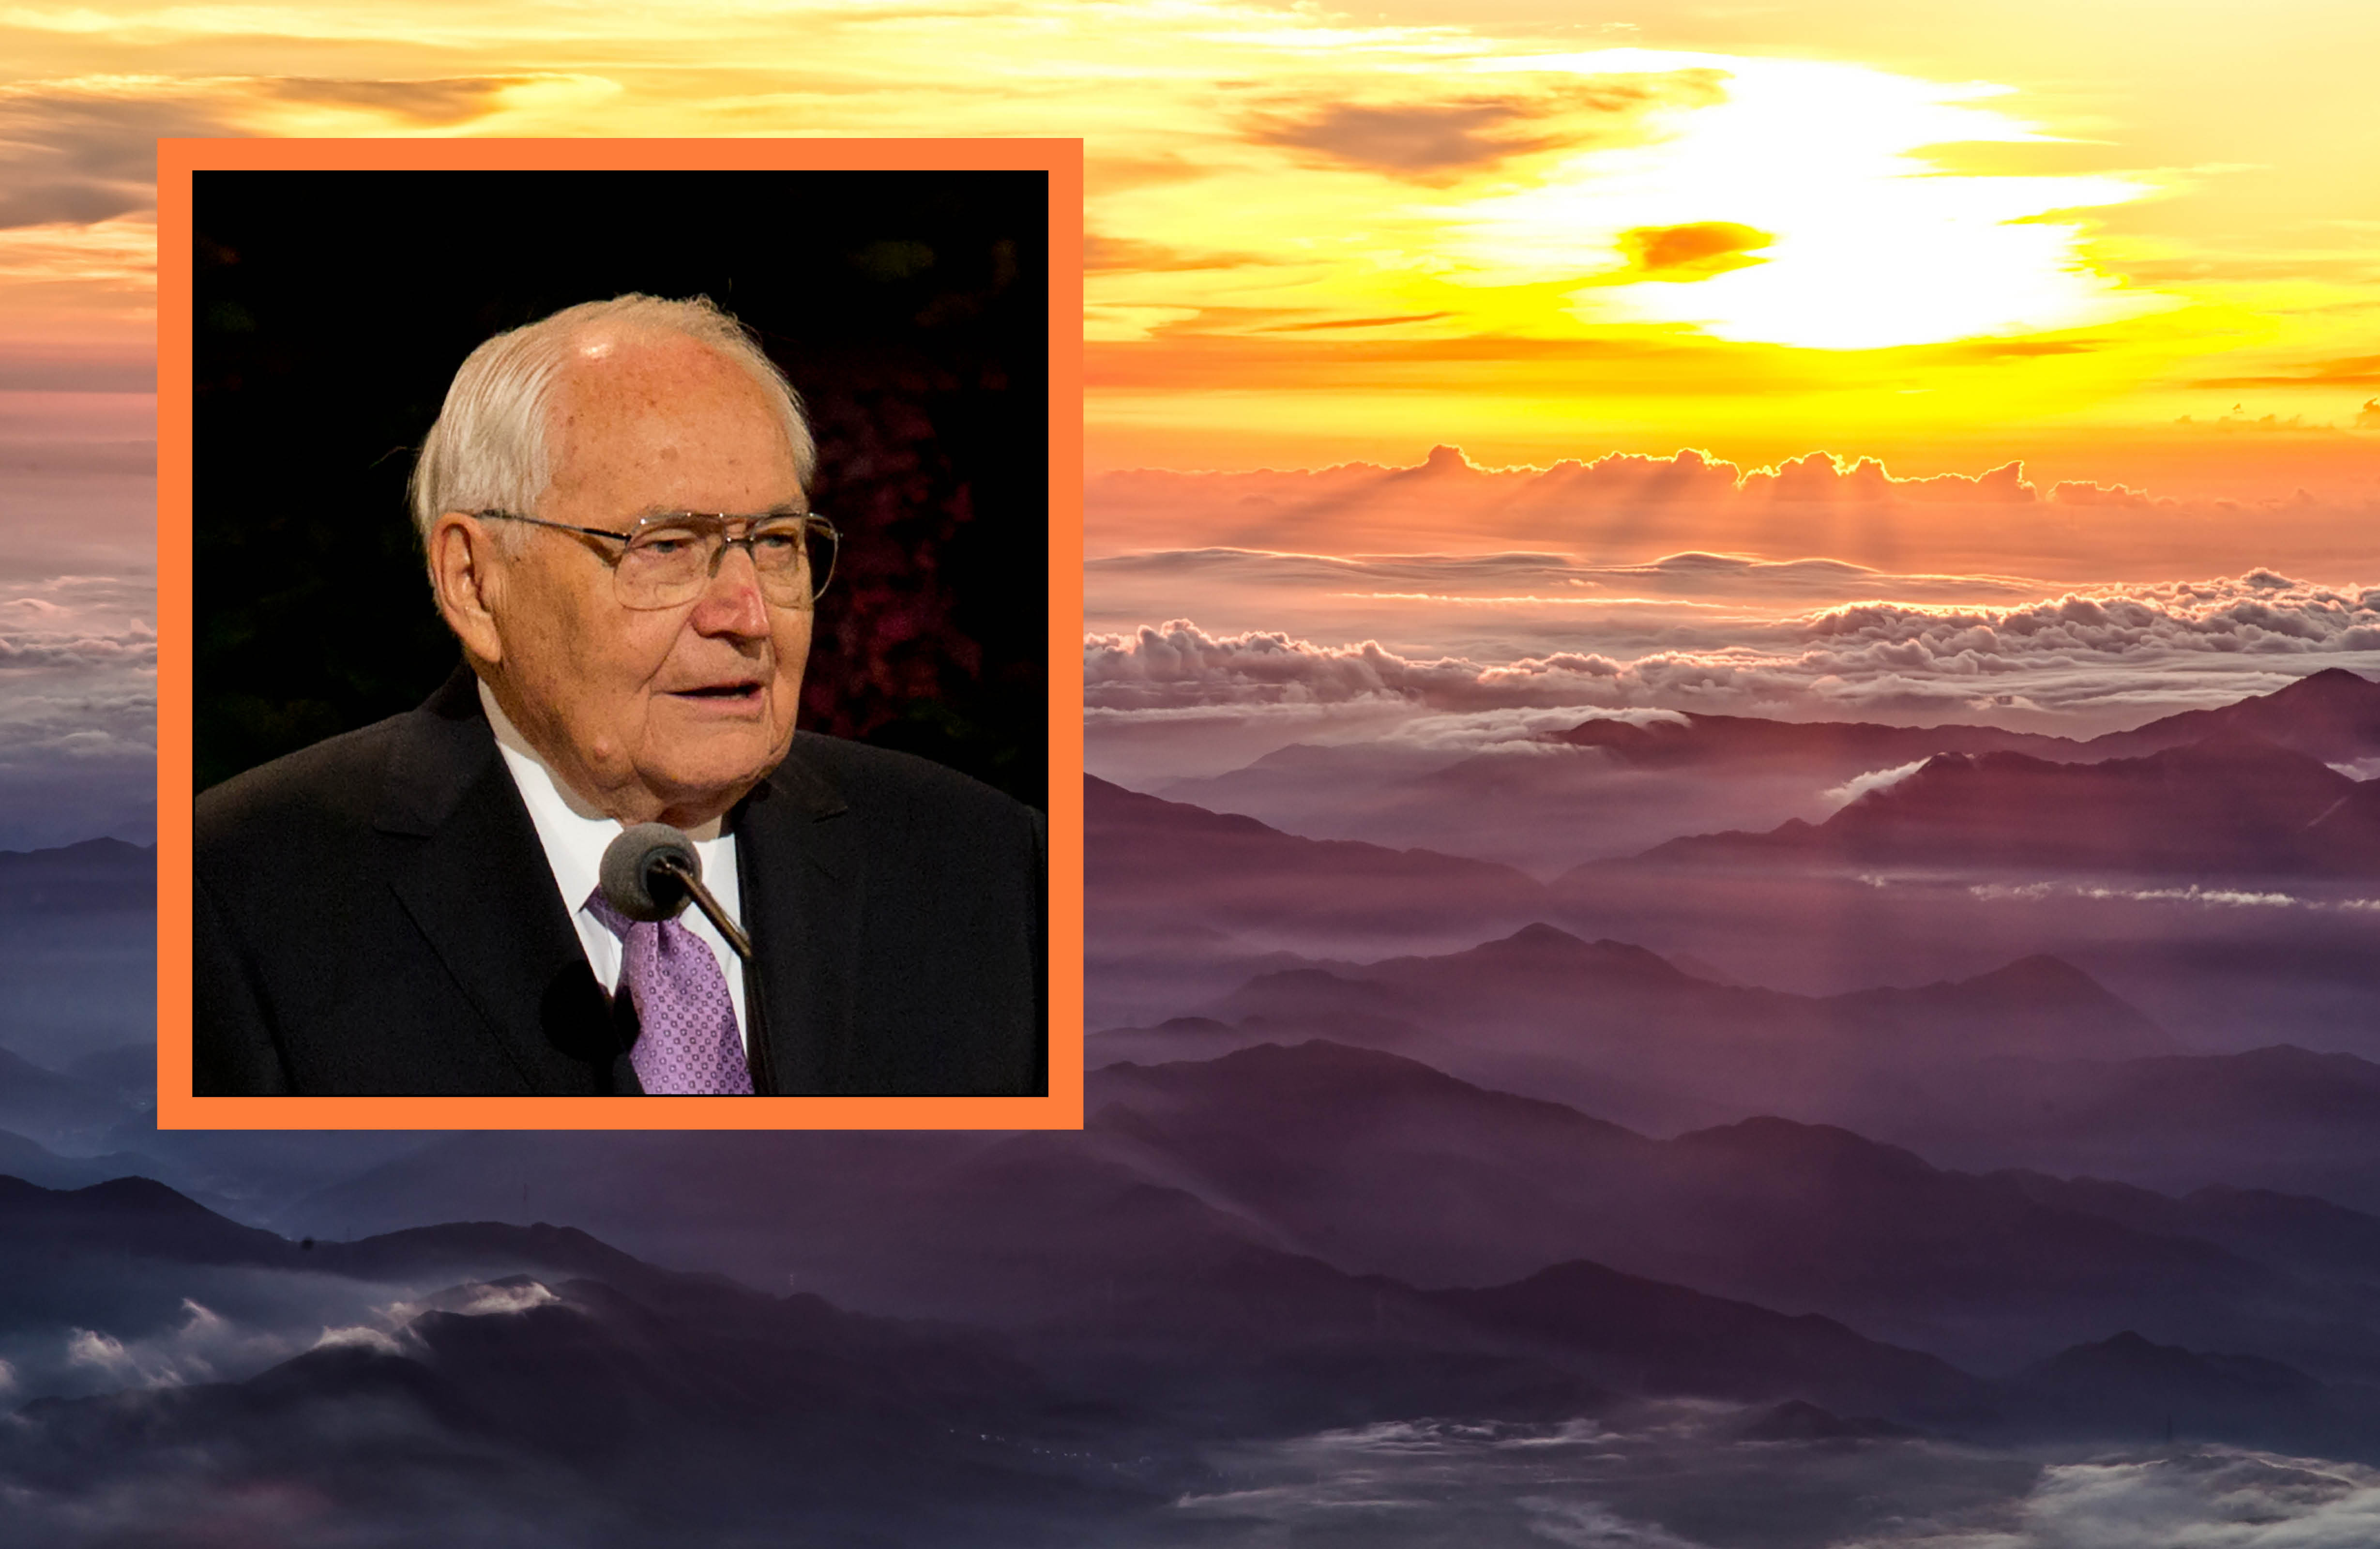 Picture of L. Tom Perry on a background with a sunset